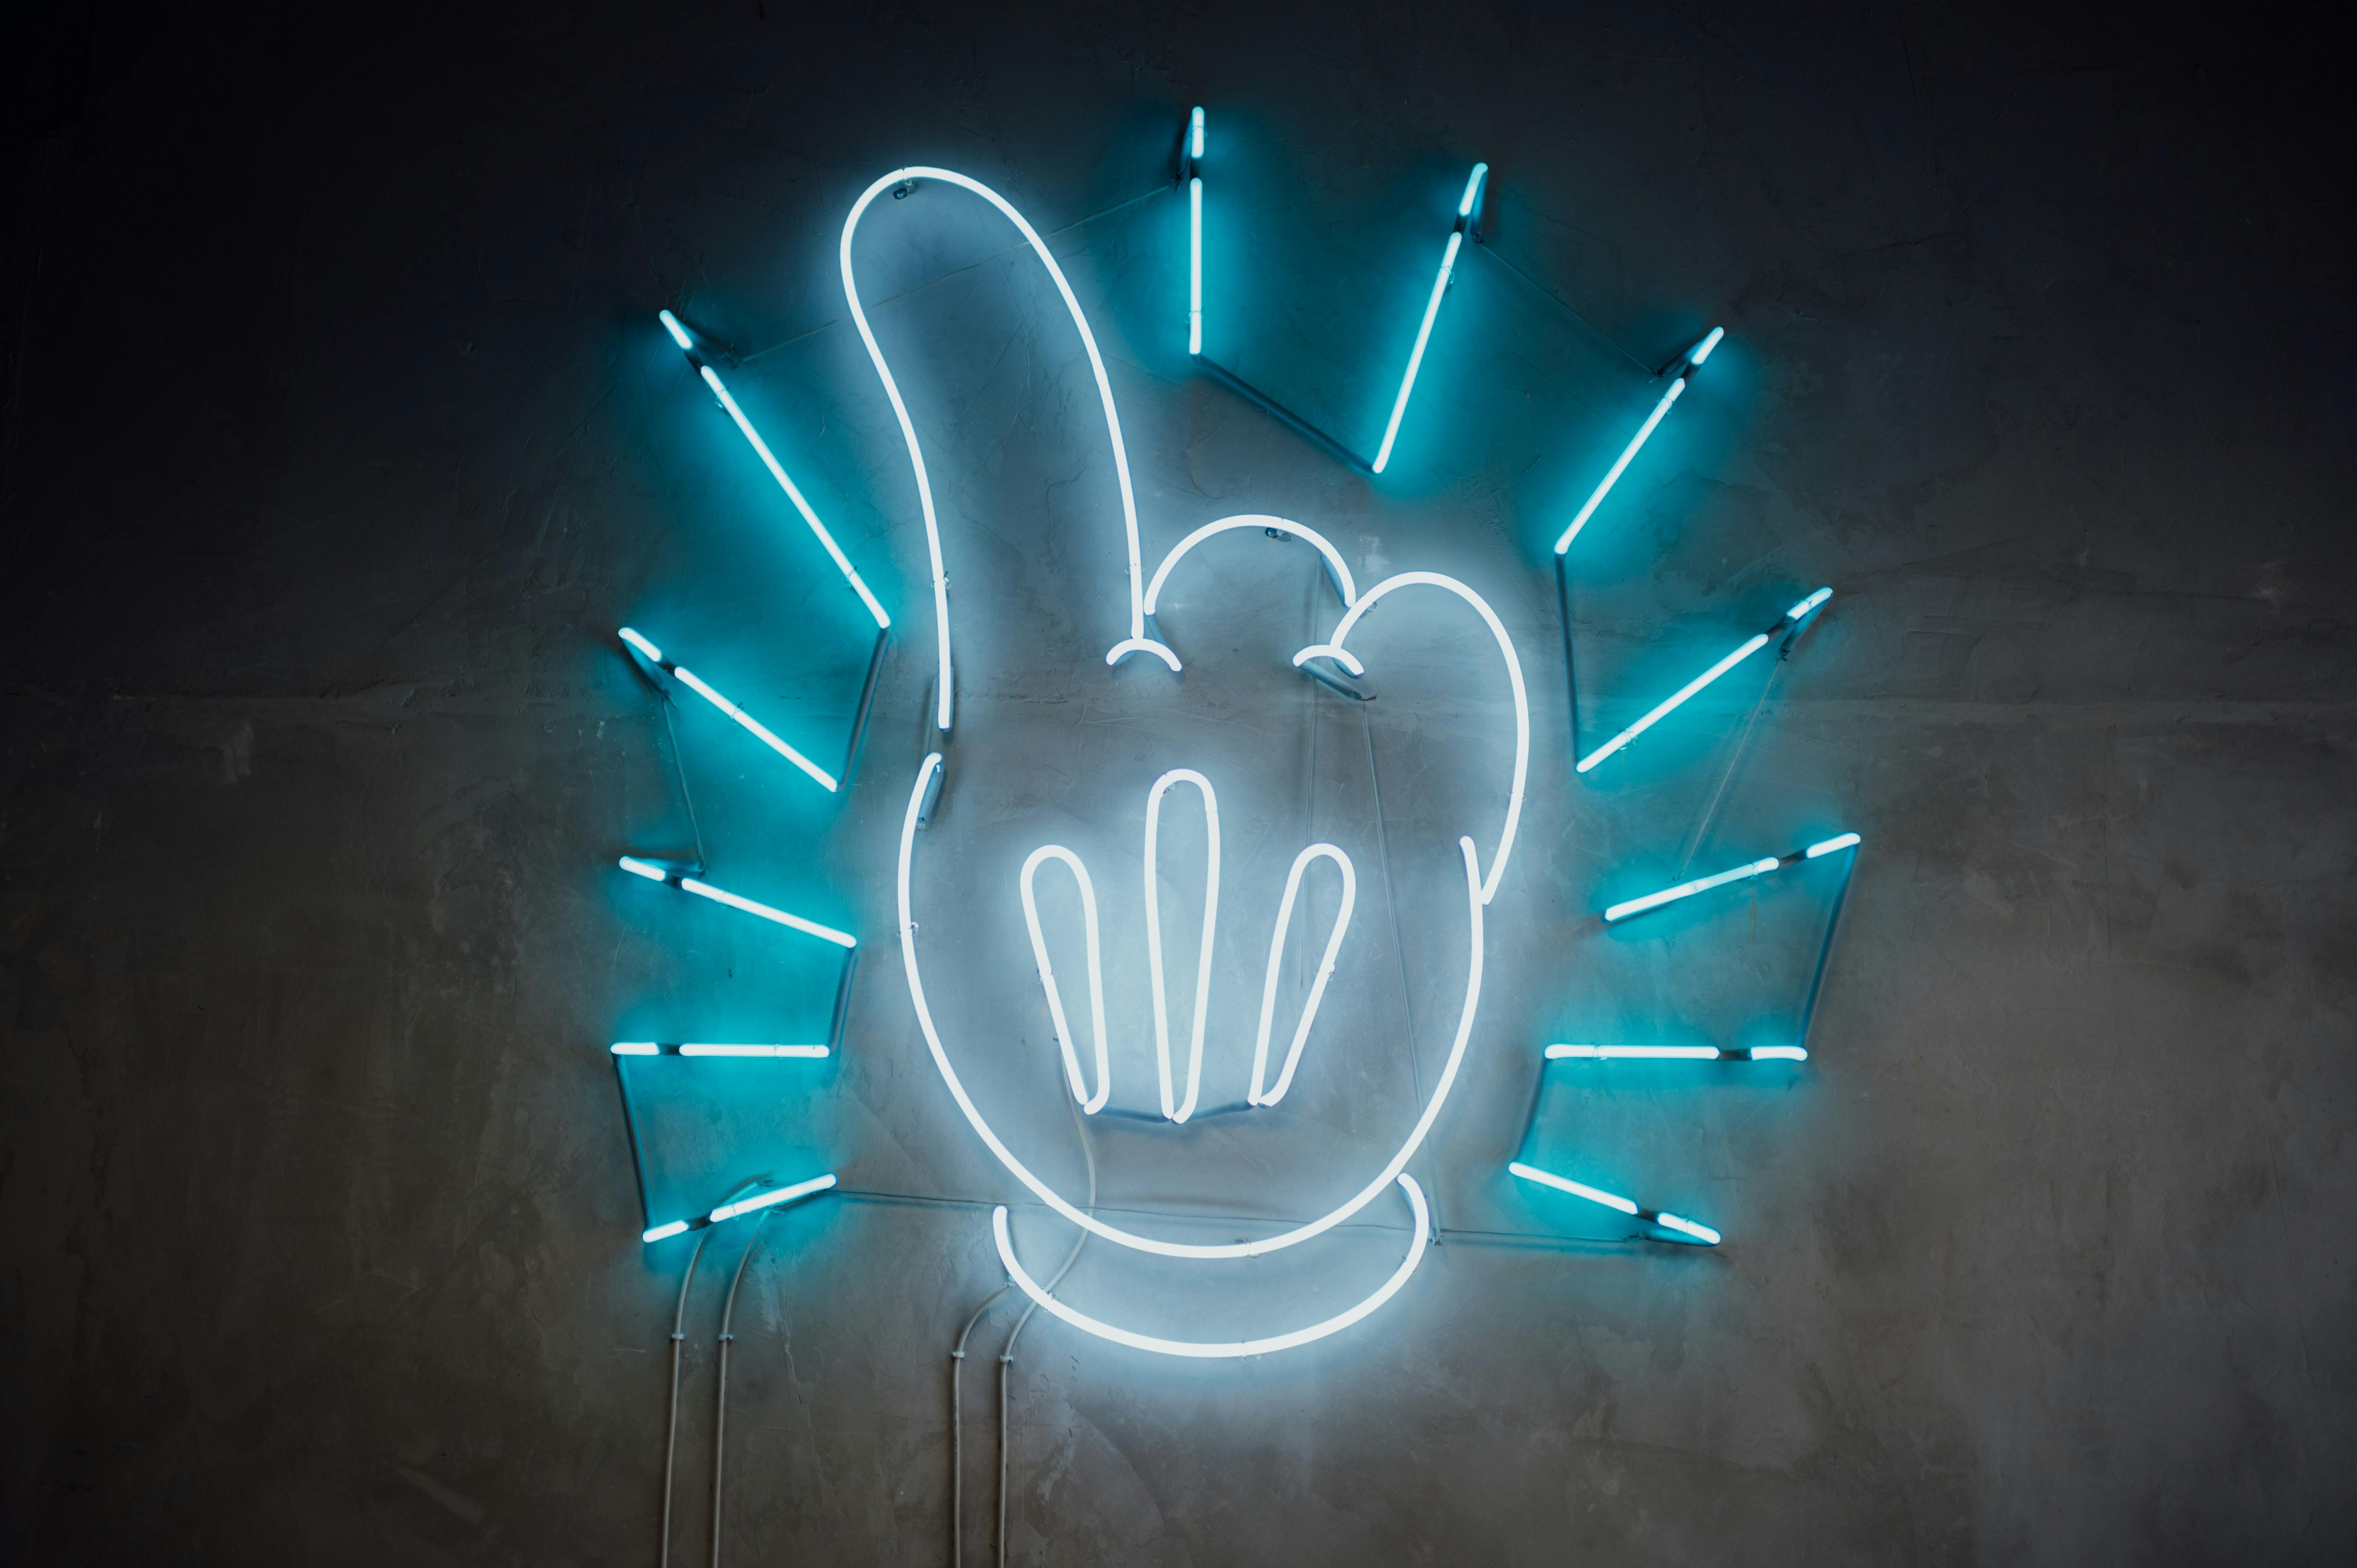 A hand shaped neon light with blue neon light accents